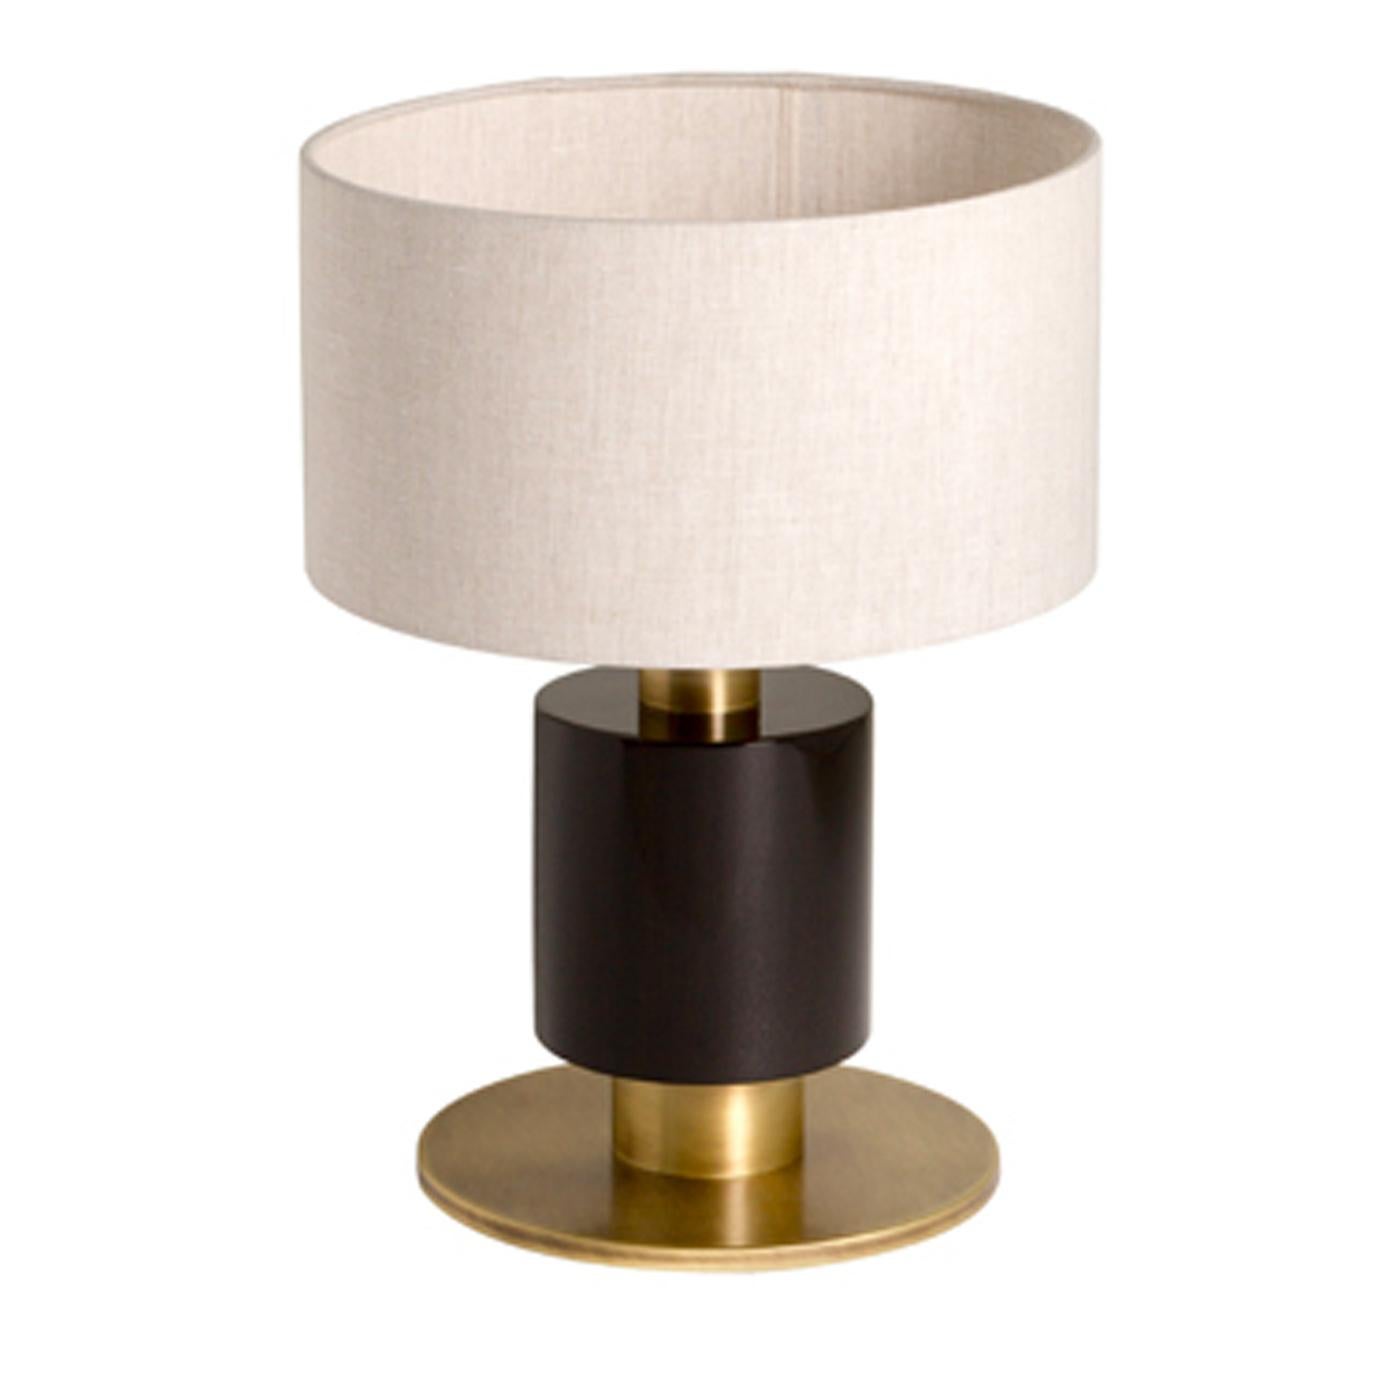 From a small collection of lighting styles, the Rindo bedside table lamp is characterized by its quirky chic style. Featuring walnut veneer with a dark glossy finish, the lamp is accented with a burnished brass finish and topped with a drum